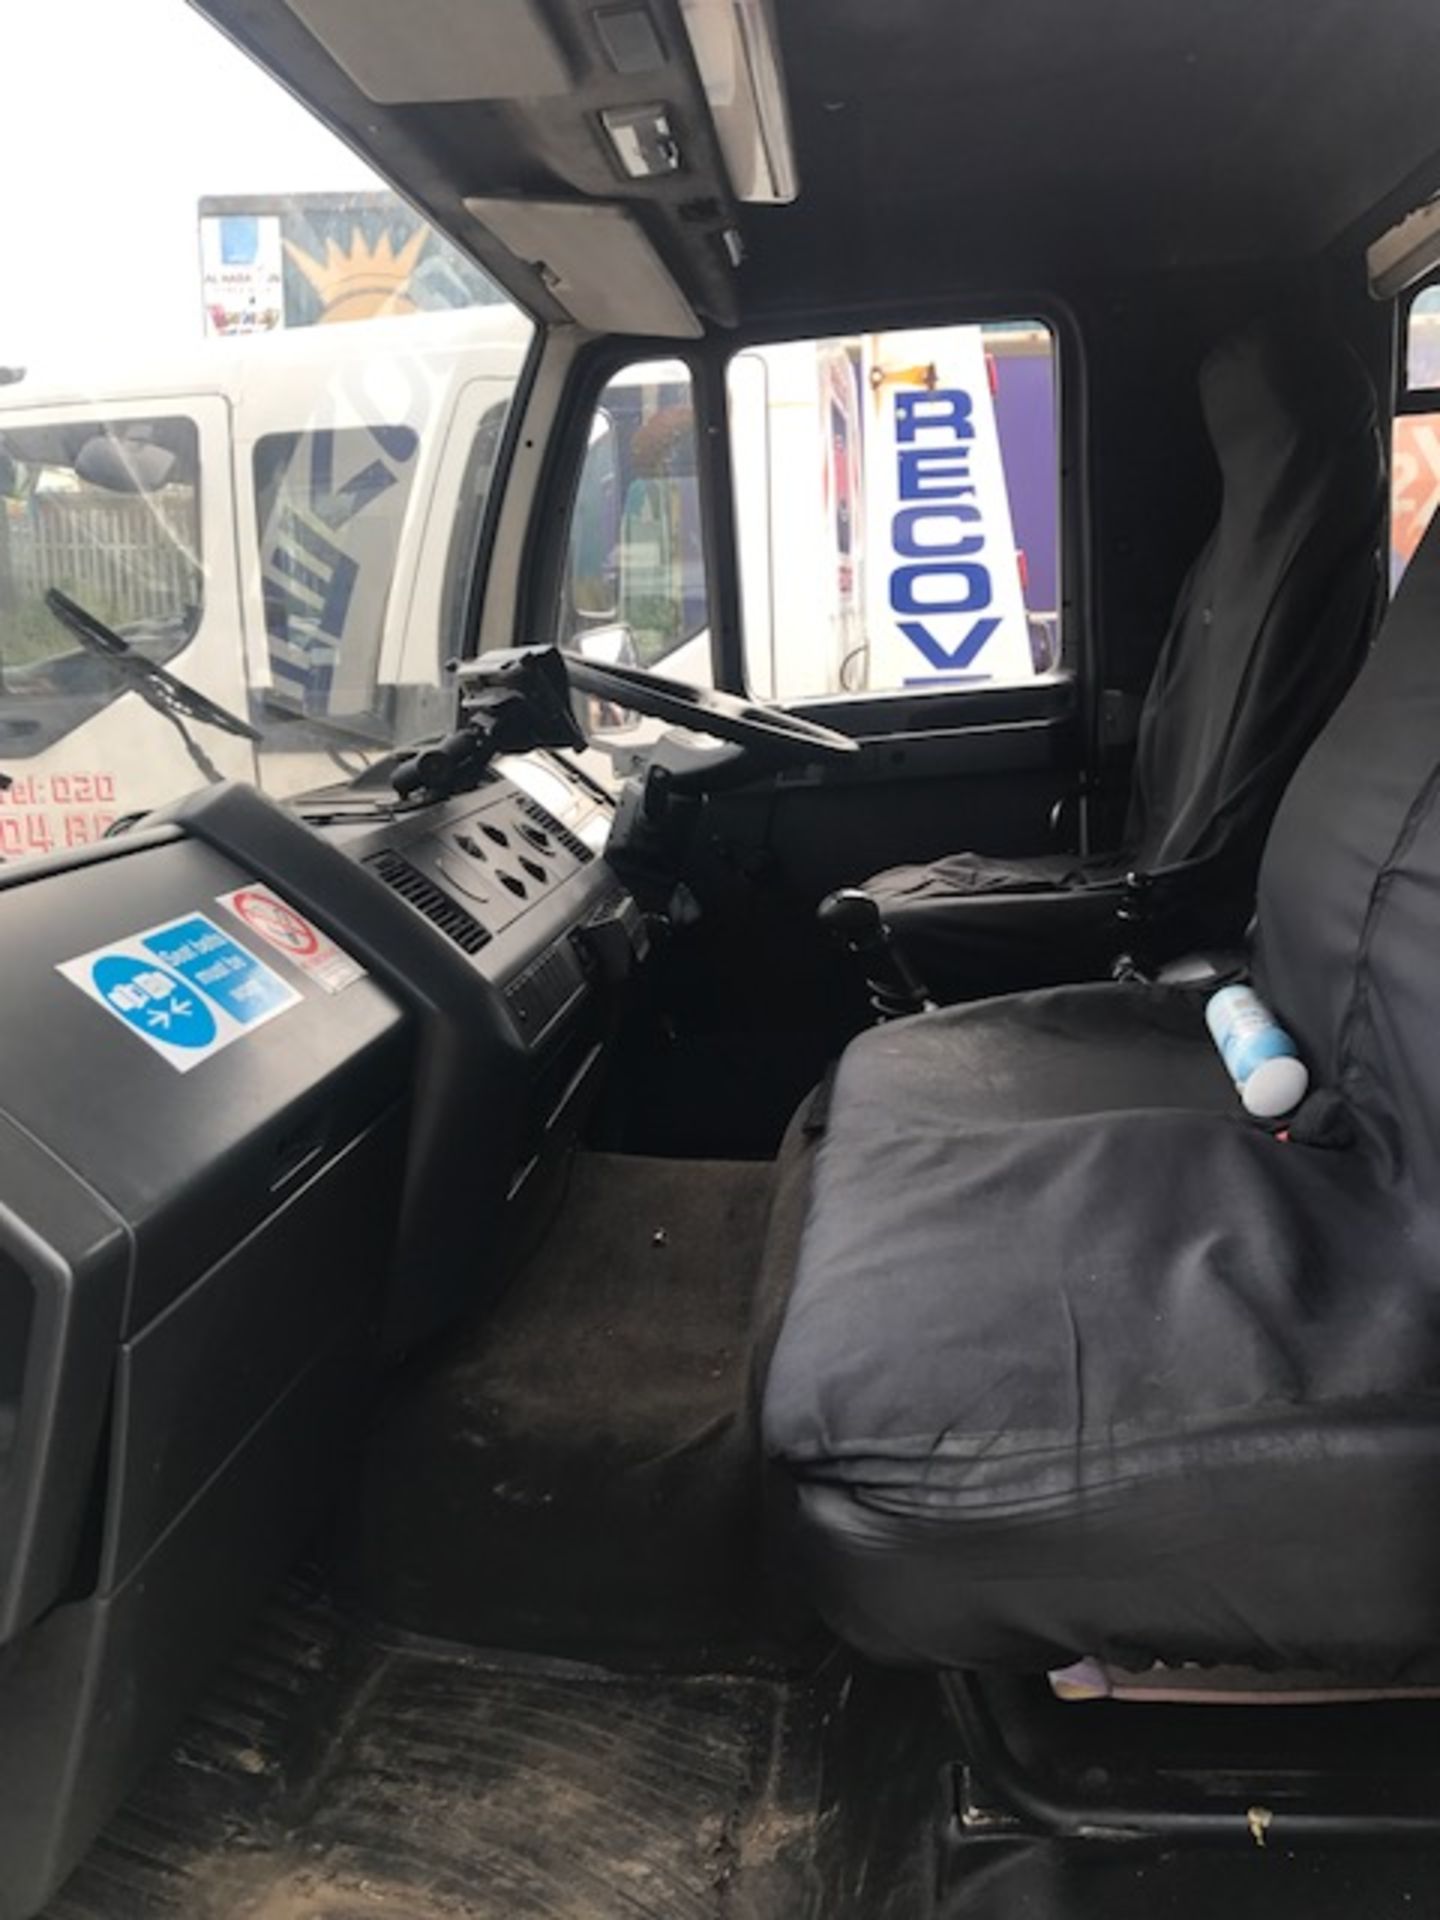 2000 Man L2000 7.5T crew cab complete with built in Garmin satnav, Vehicle converted by Whiteacrews, - Image 13 of 18